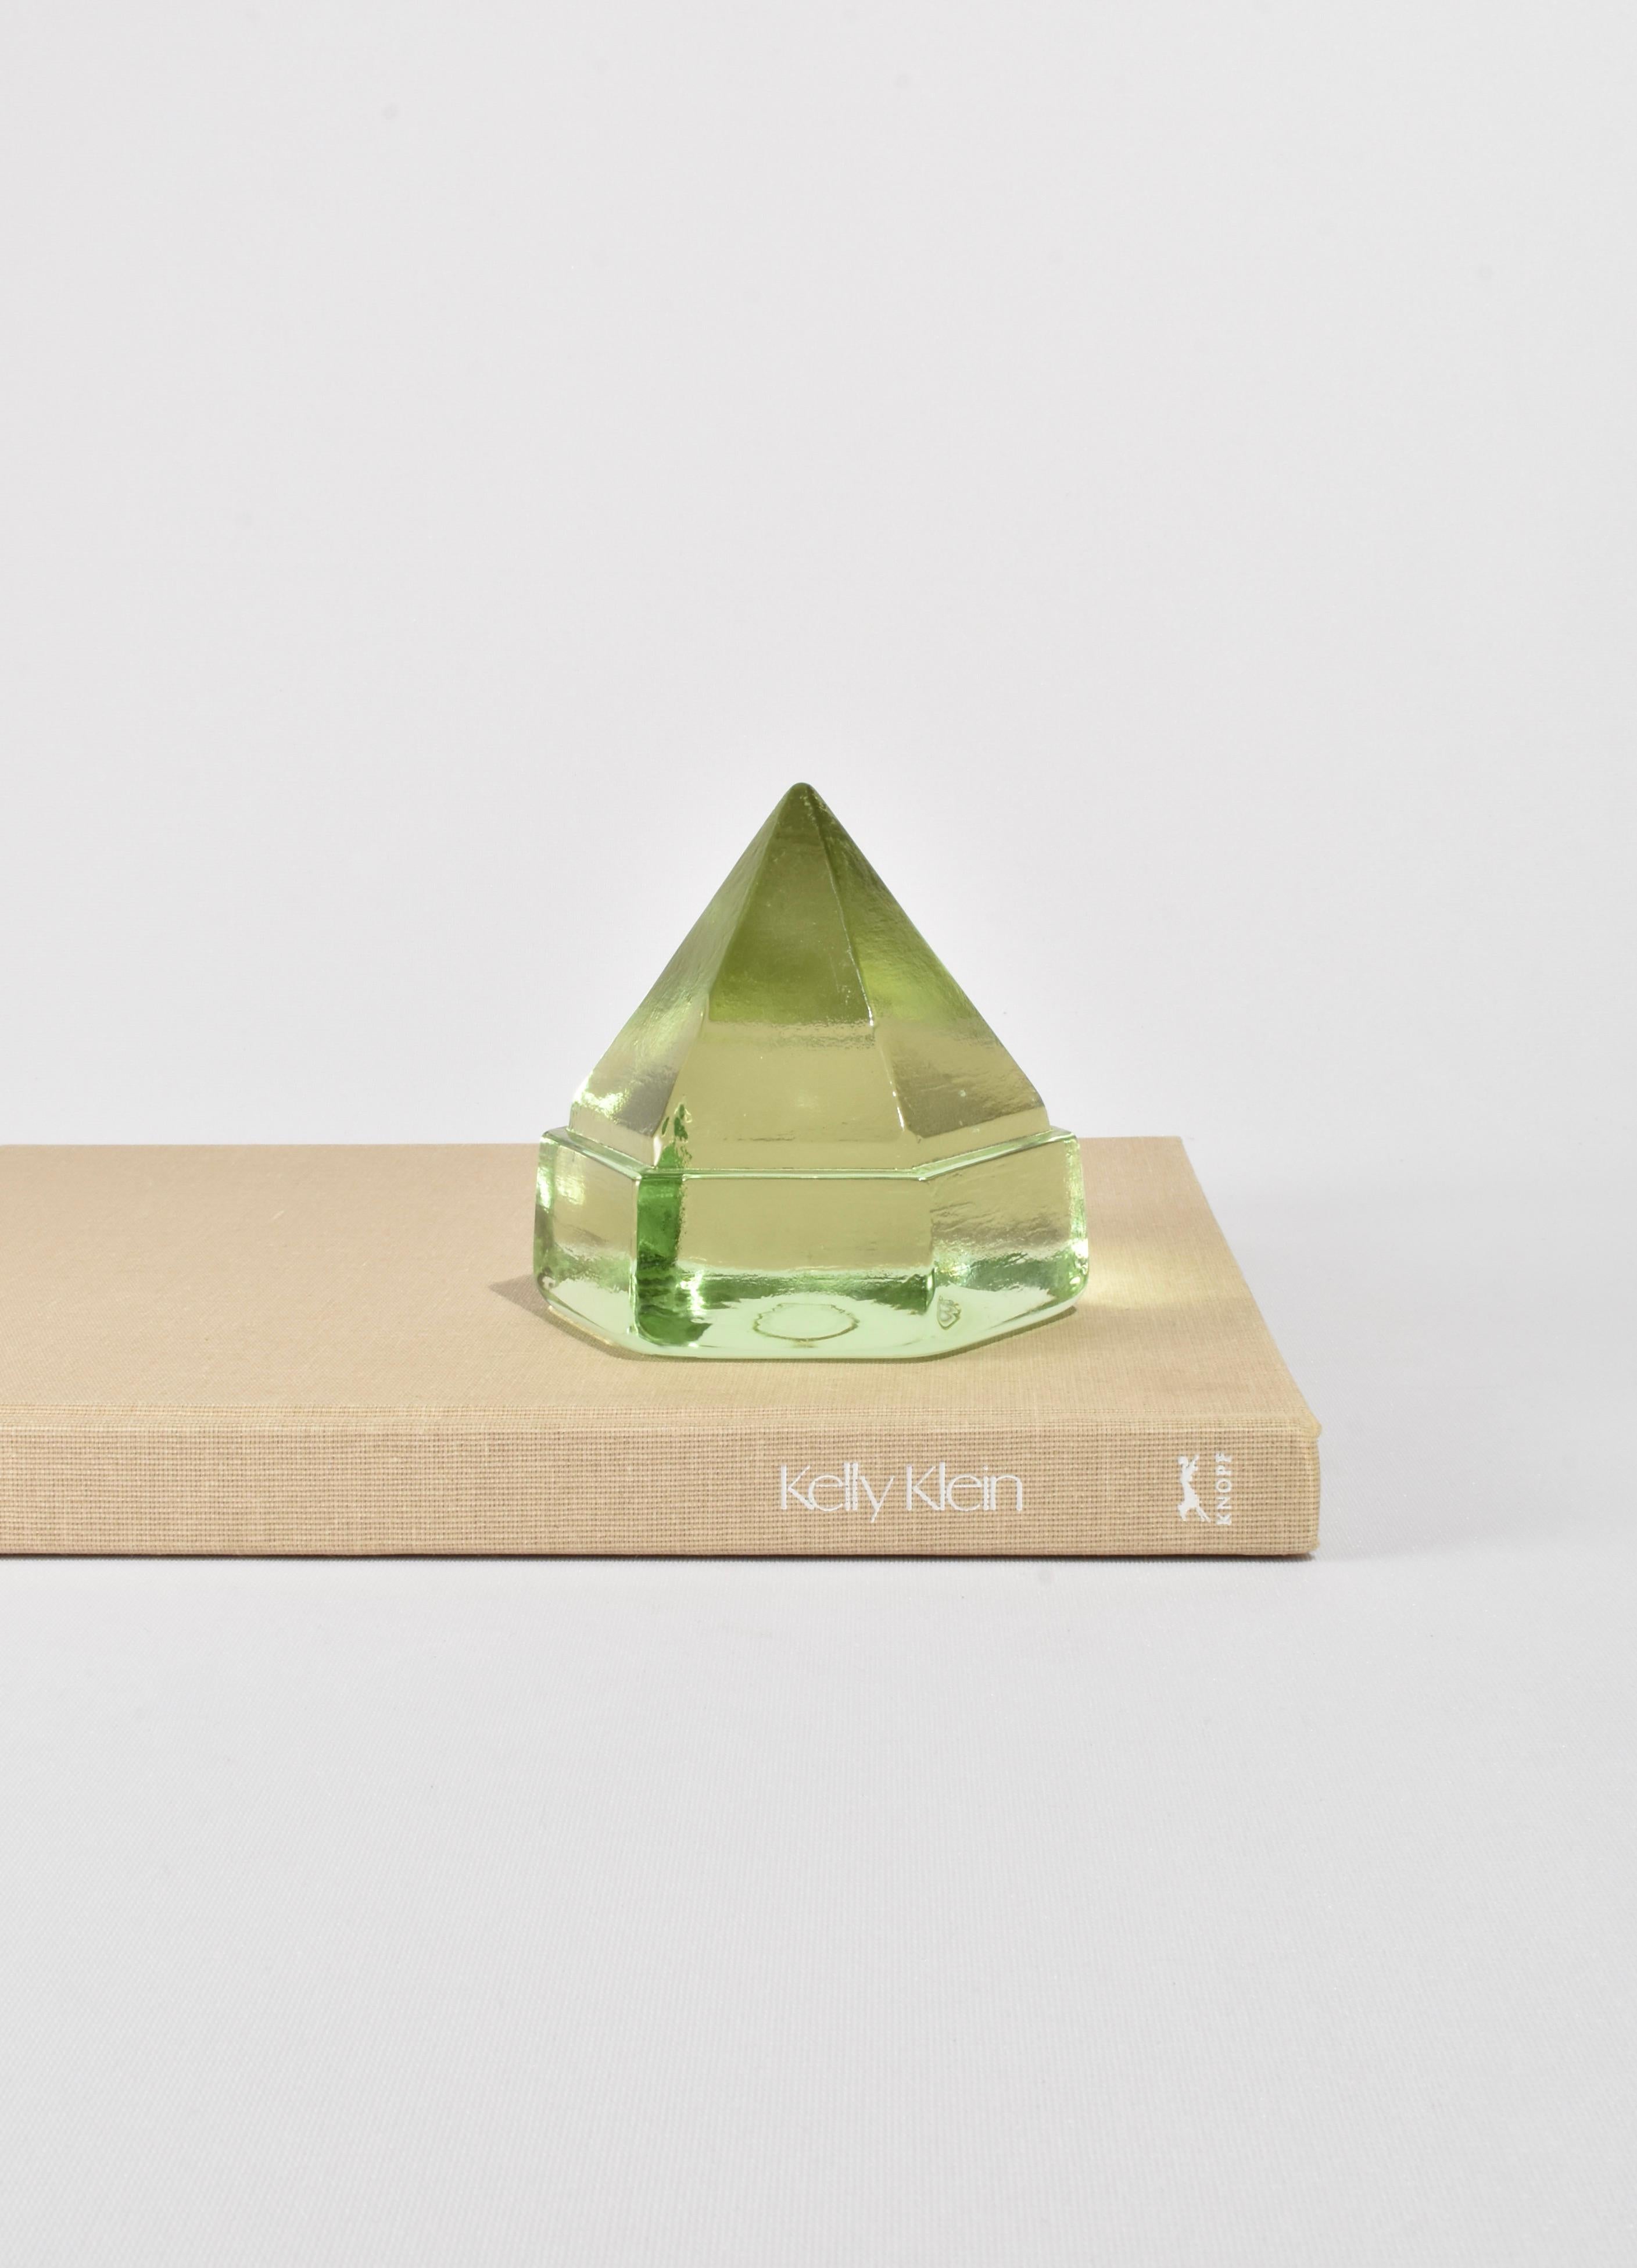 Beautiful light green glass prism. May be used as a paperweight or displayed on its own as a sculptural piece.